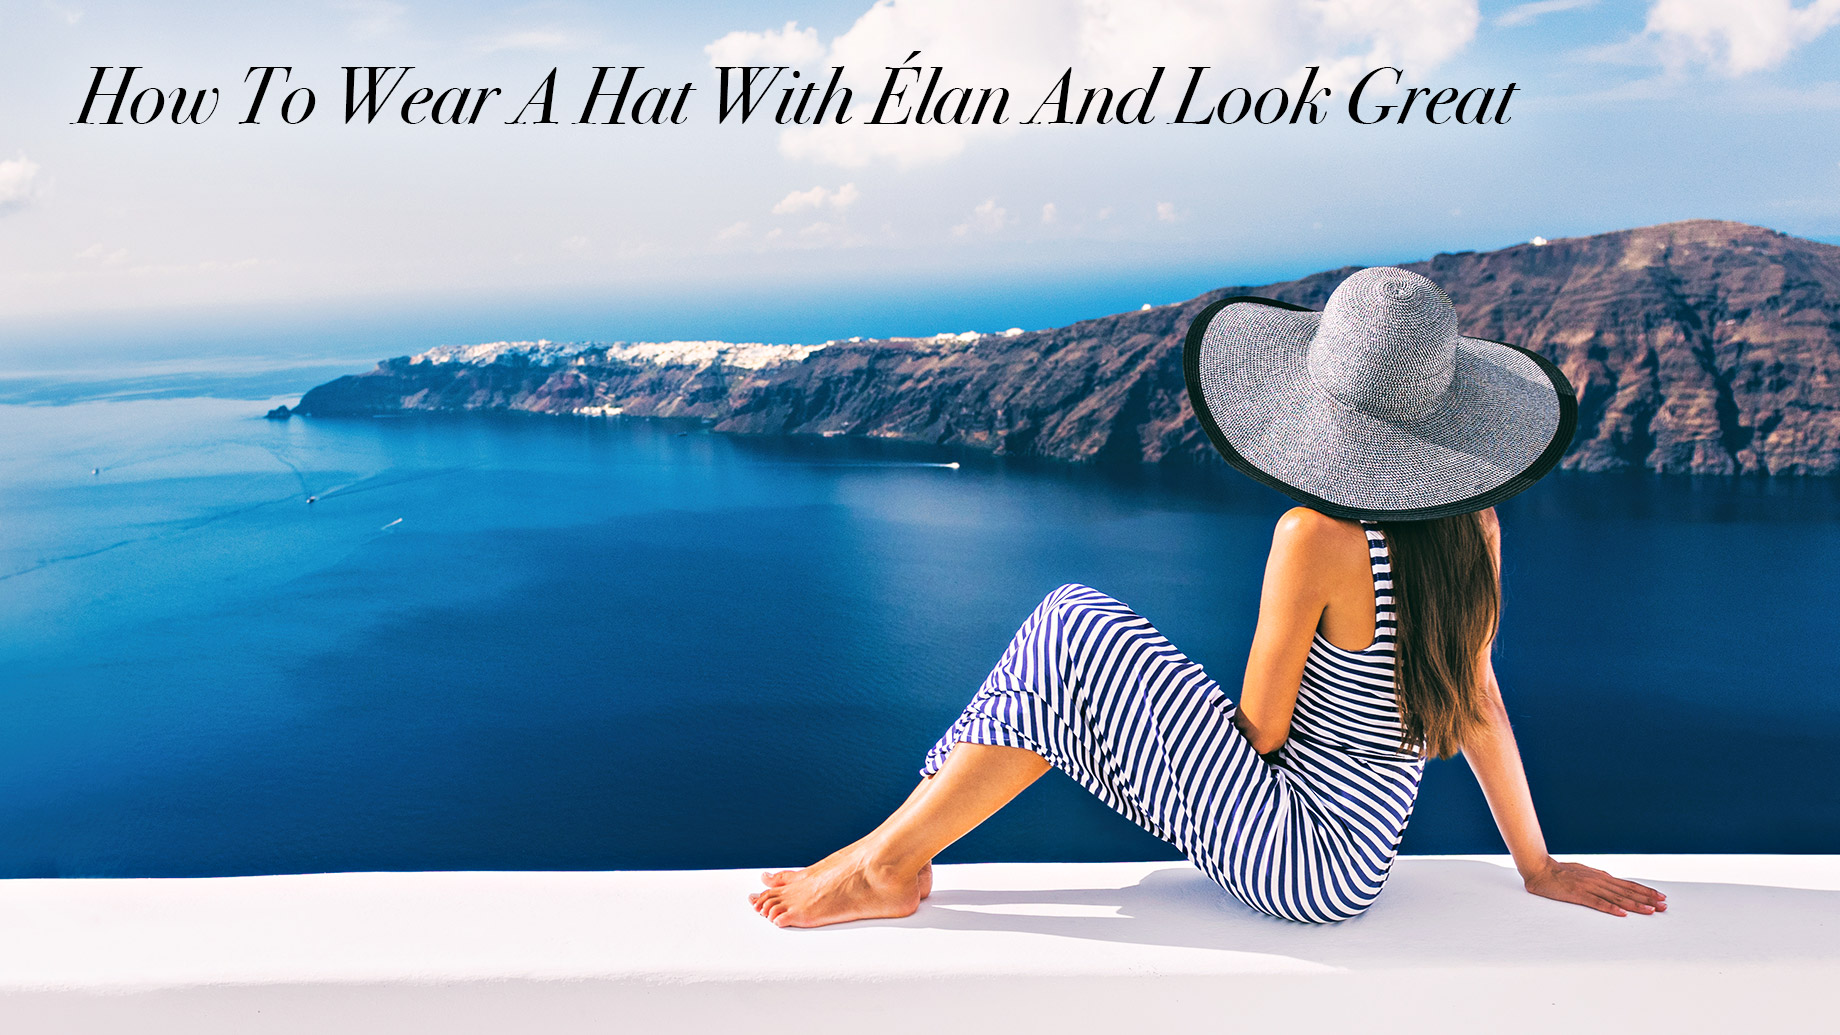 How To Wear A Hat With Élan And Look Great 